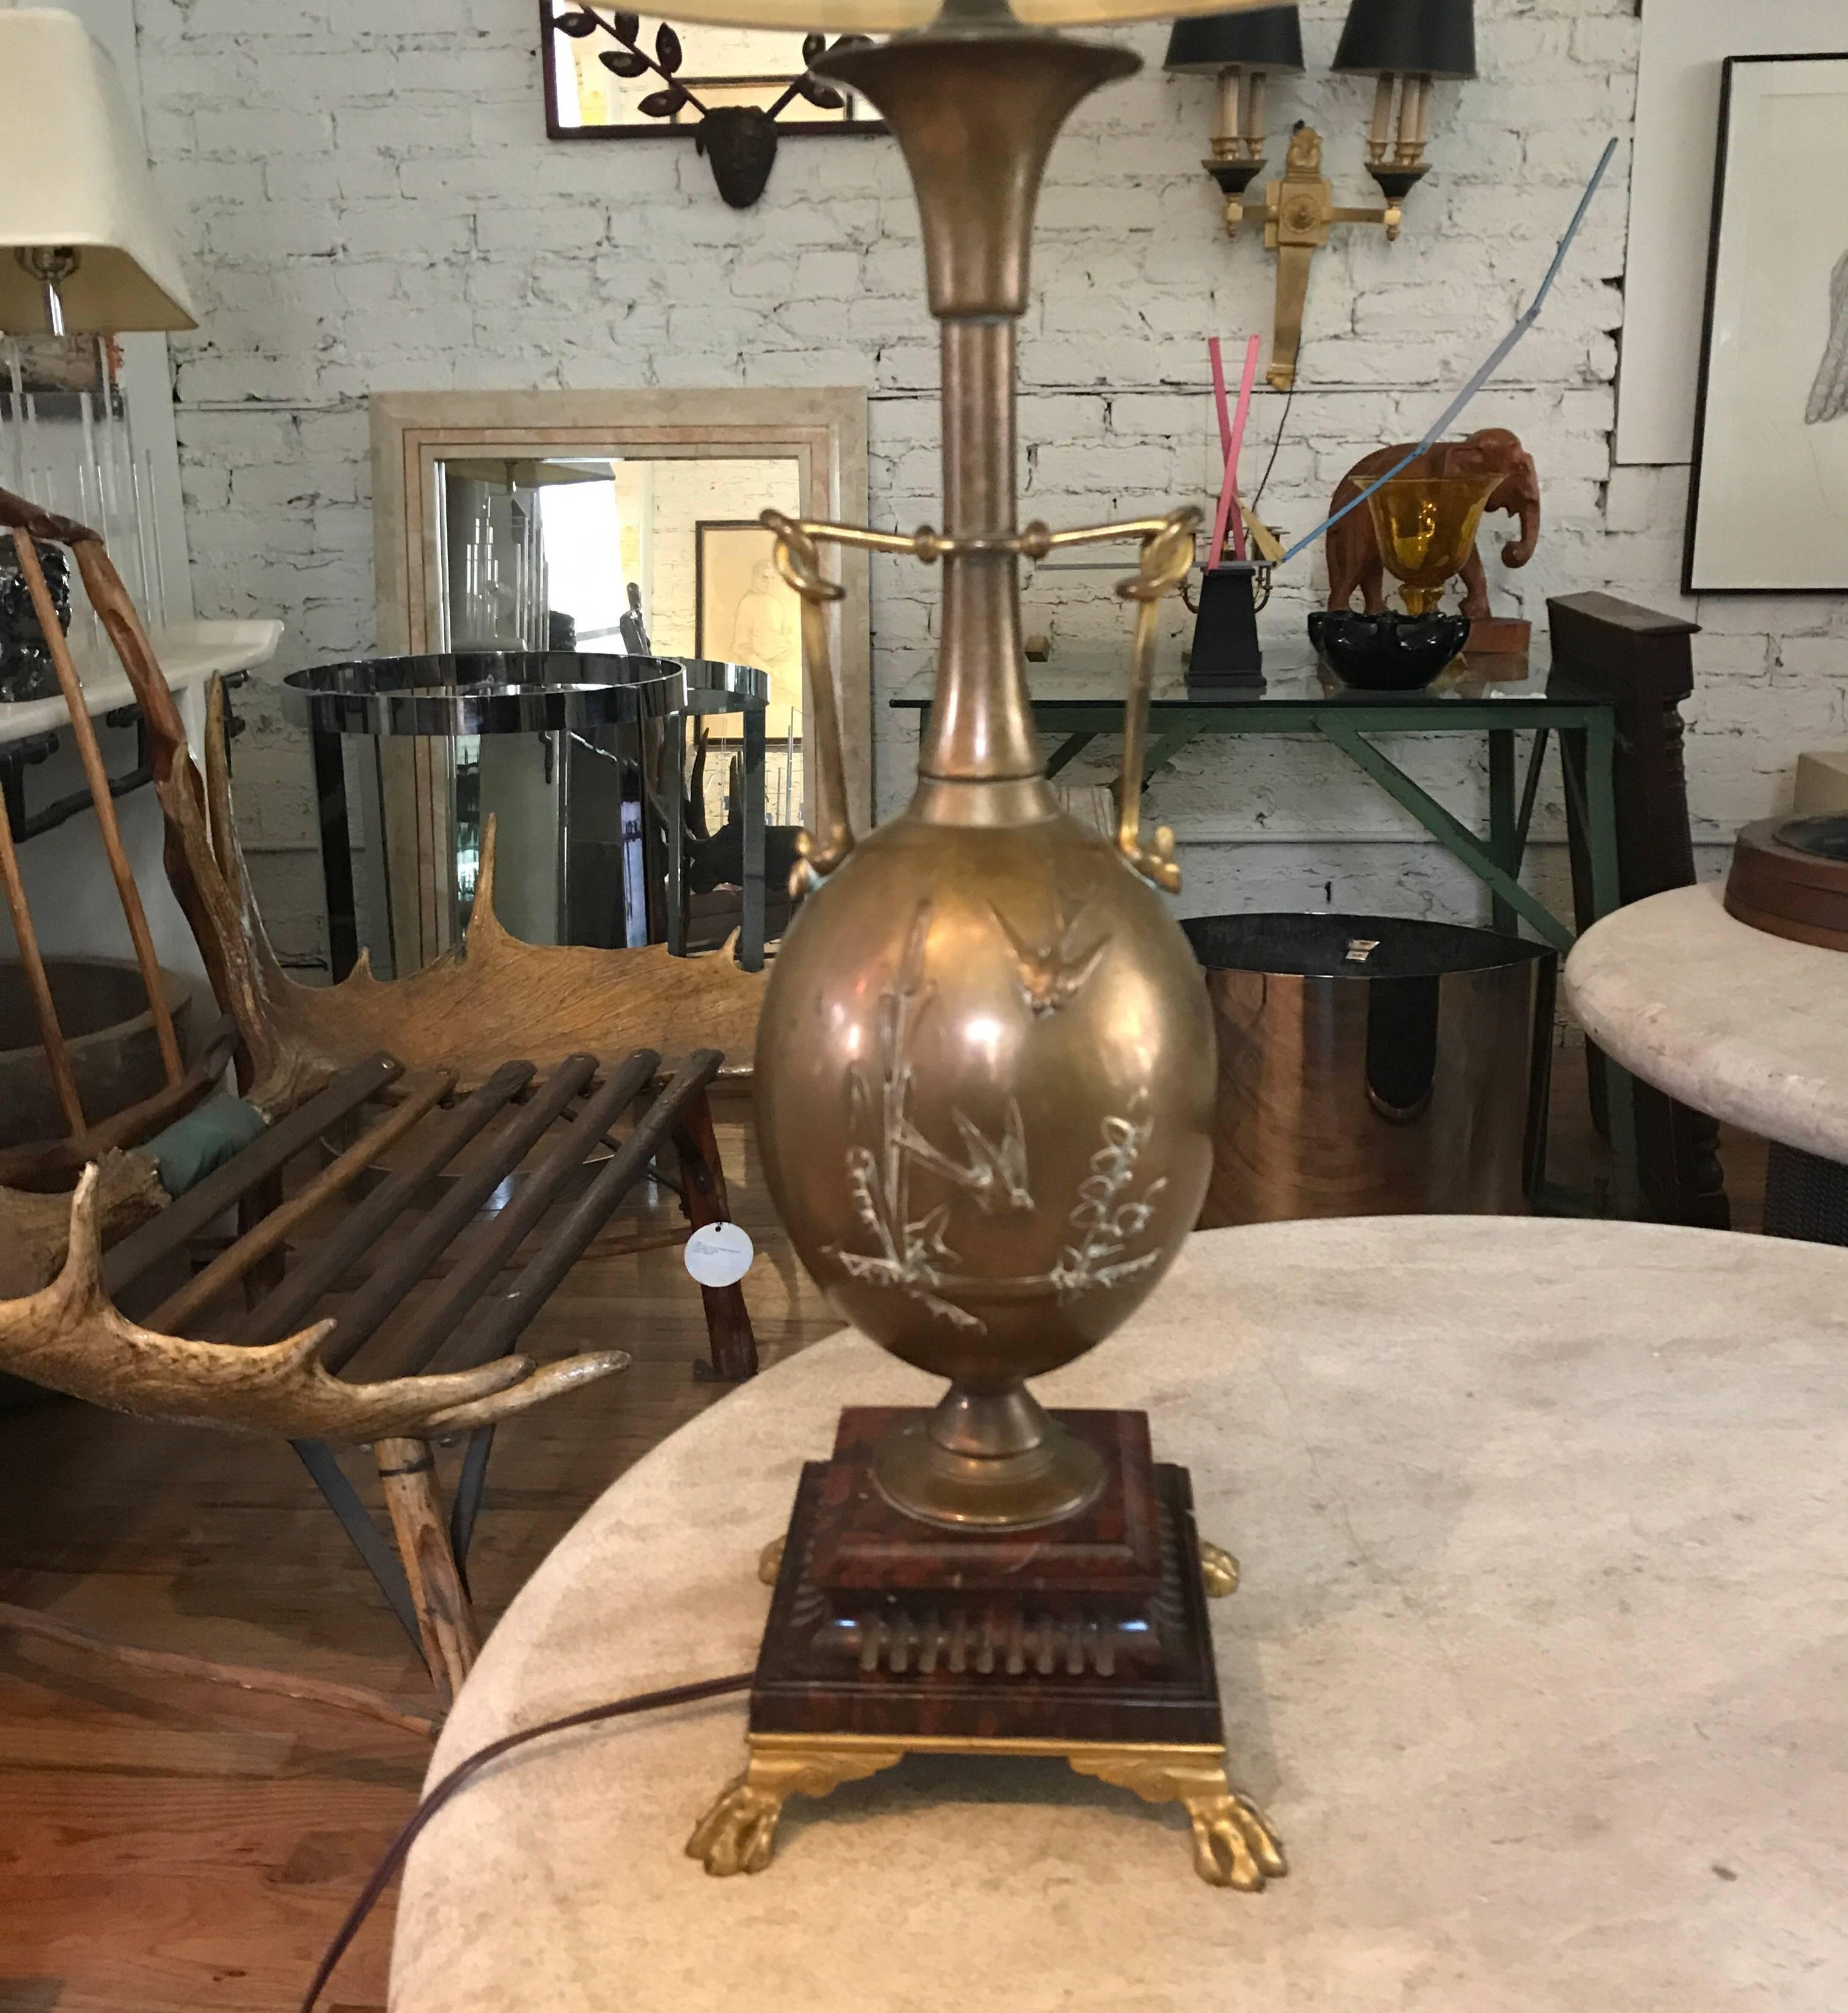 19th century French brass lamp.
The Japonisme lamp was designed by Henry Cahieux and was cast by the distinguished French foundry 
Barbedienne. Its ostrich egg shaped body has Herons cattails and arowwood designs in relief.
The lamps rest on a Rouge